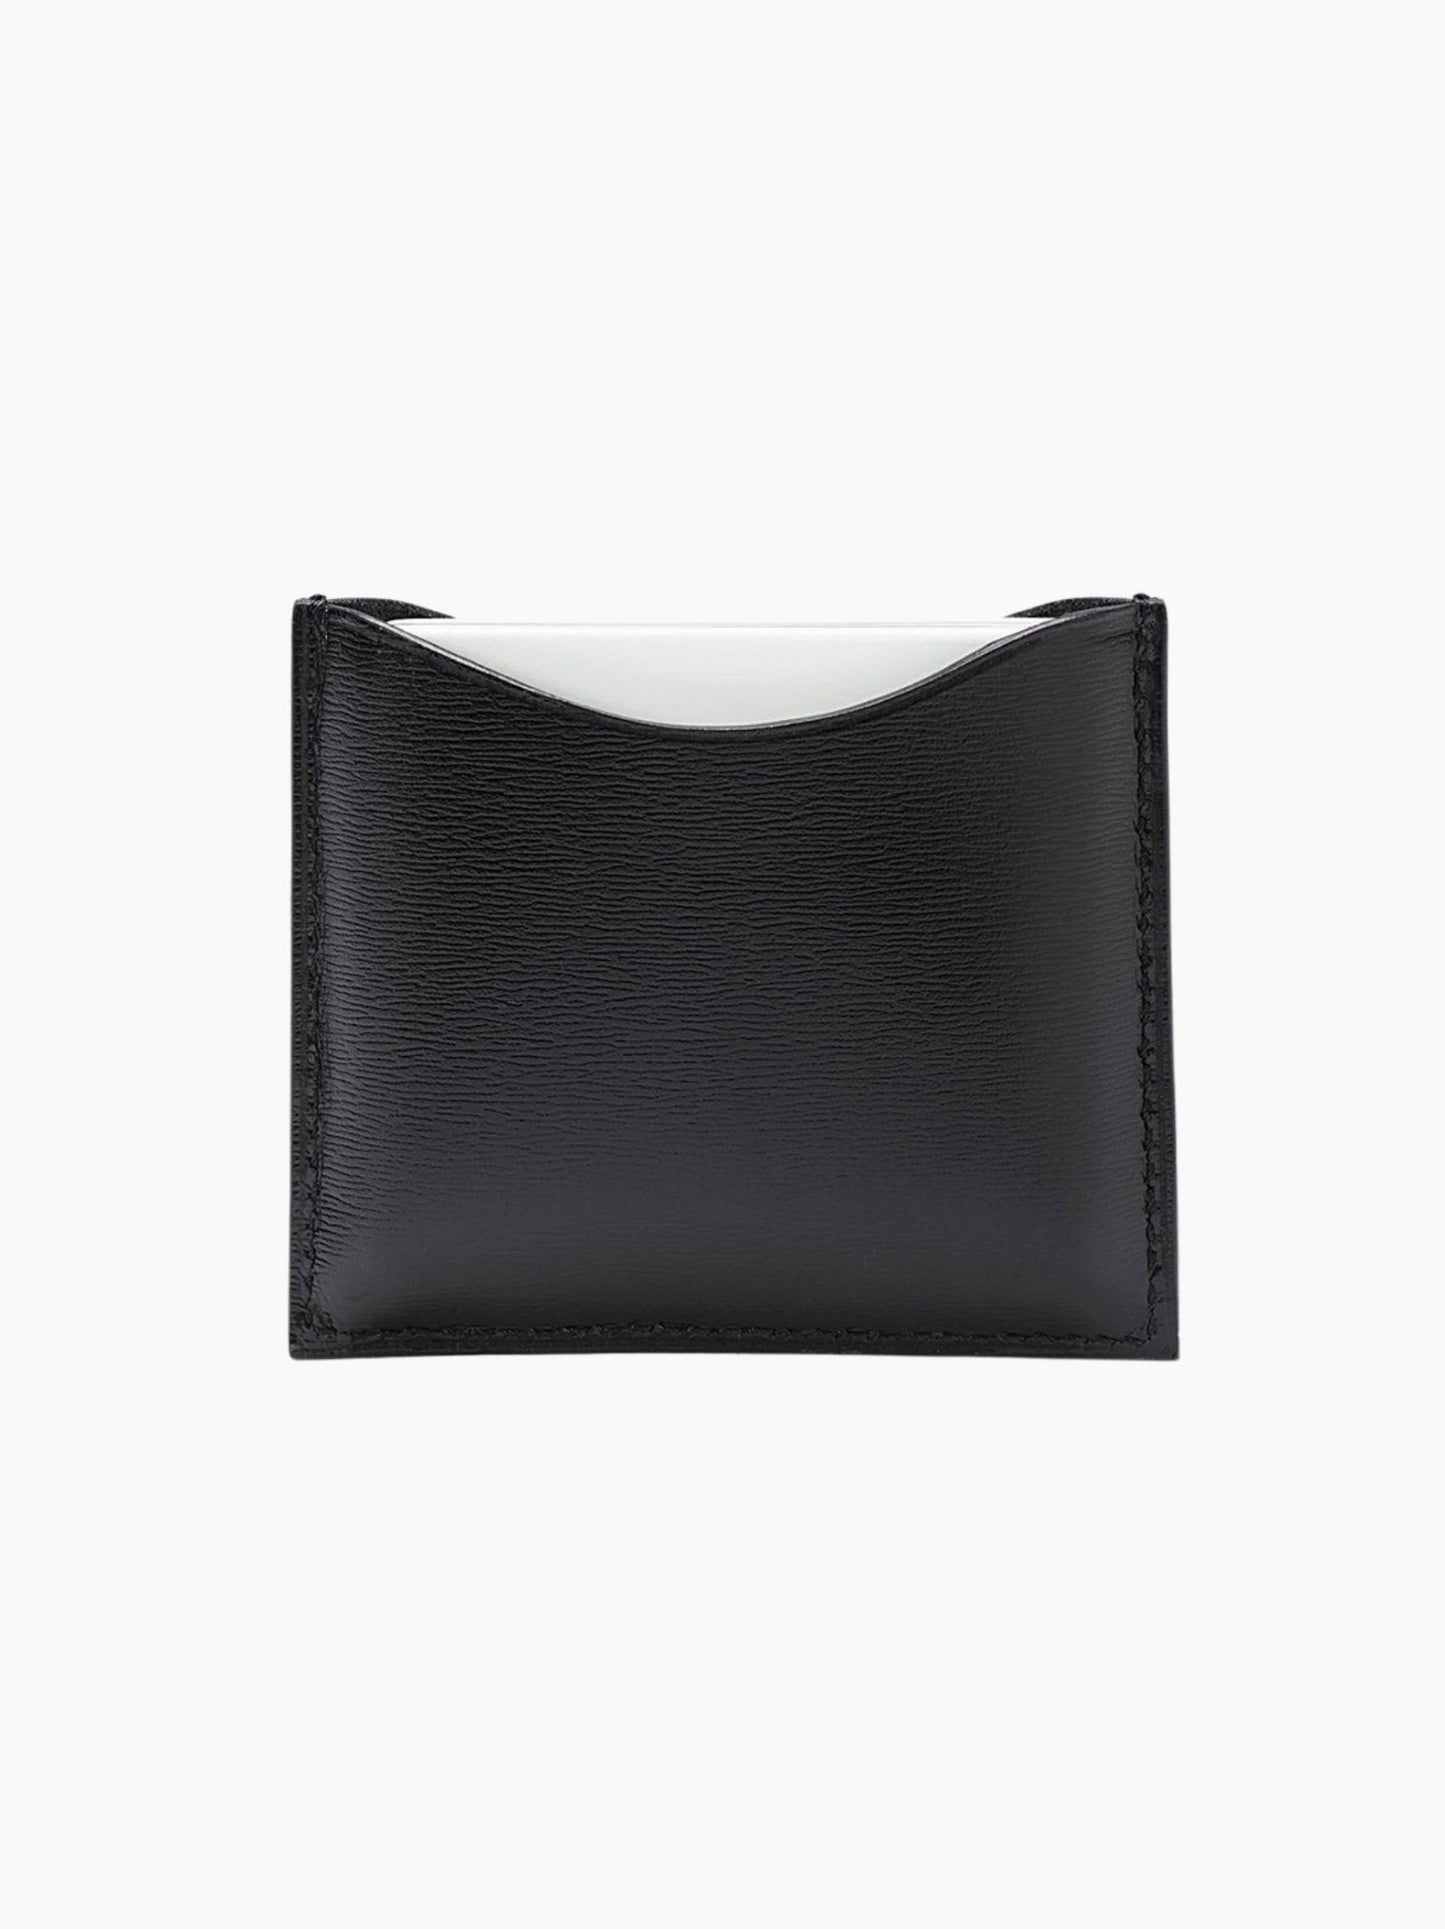 Black Leather Compact Case | The Go-To